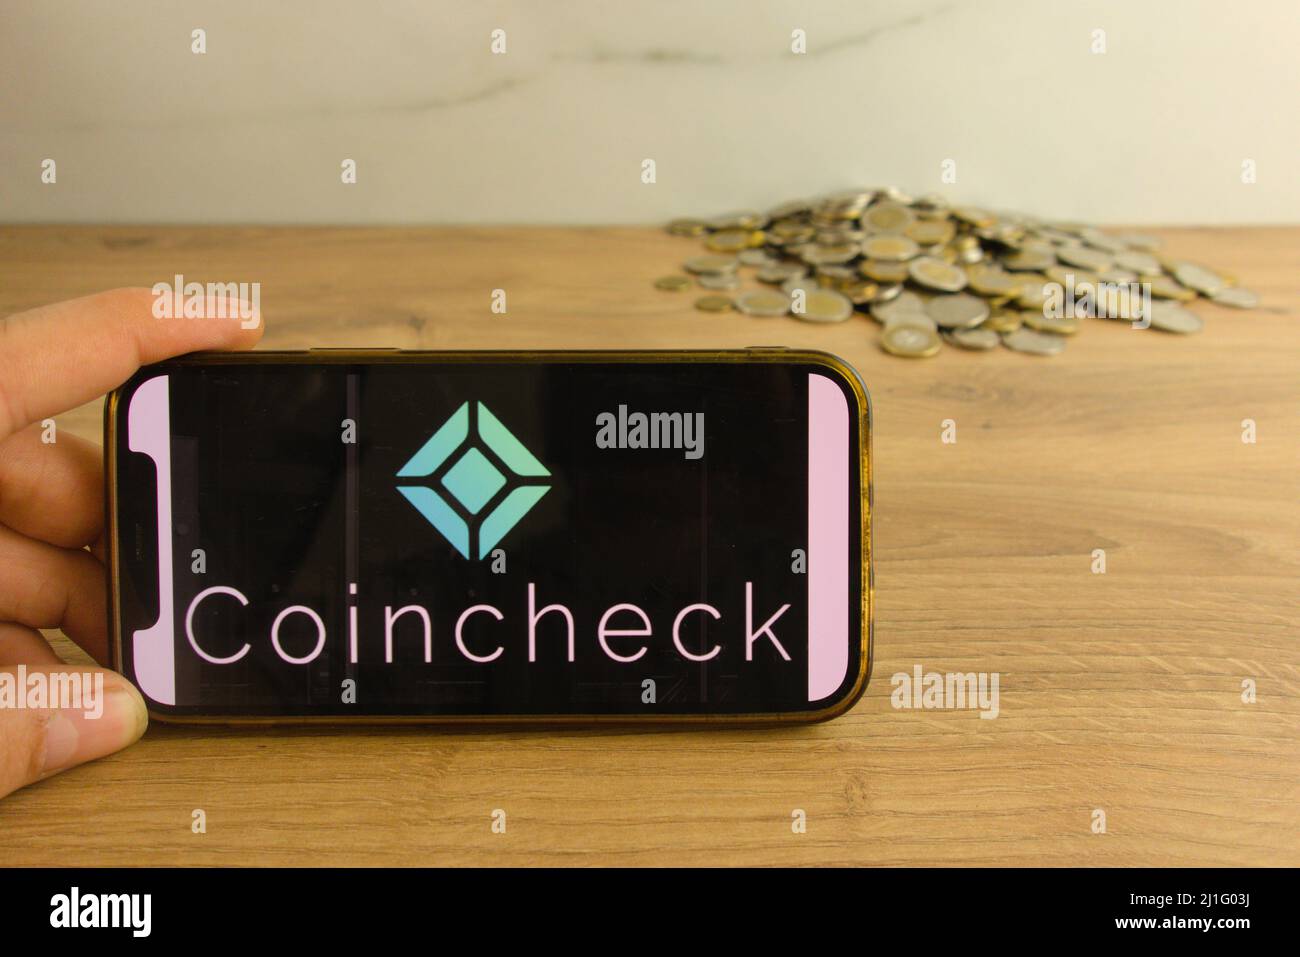 KONSKIE, POLAND - March 20, 2022: Coincheck cryptocurrency exchange logo on mobile phone. Online trading, blockchain technology concept Stock Photo